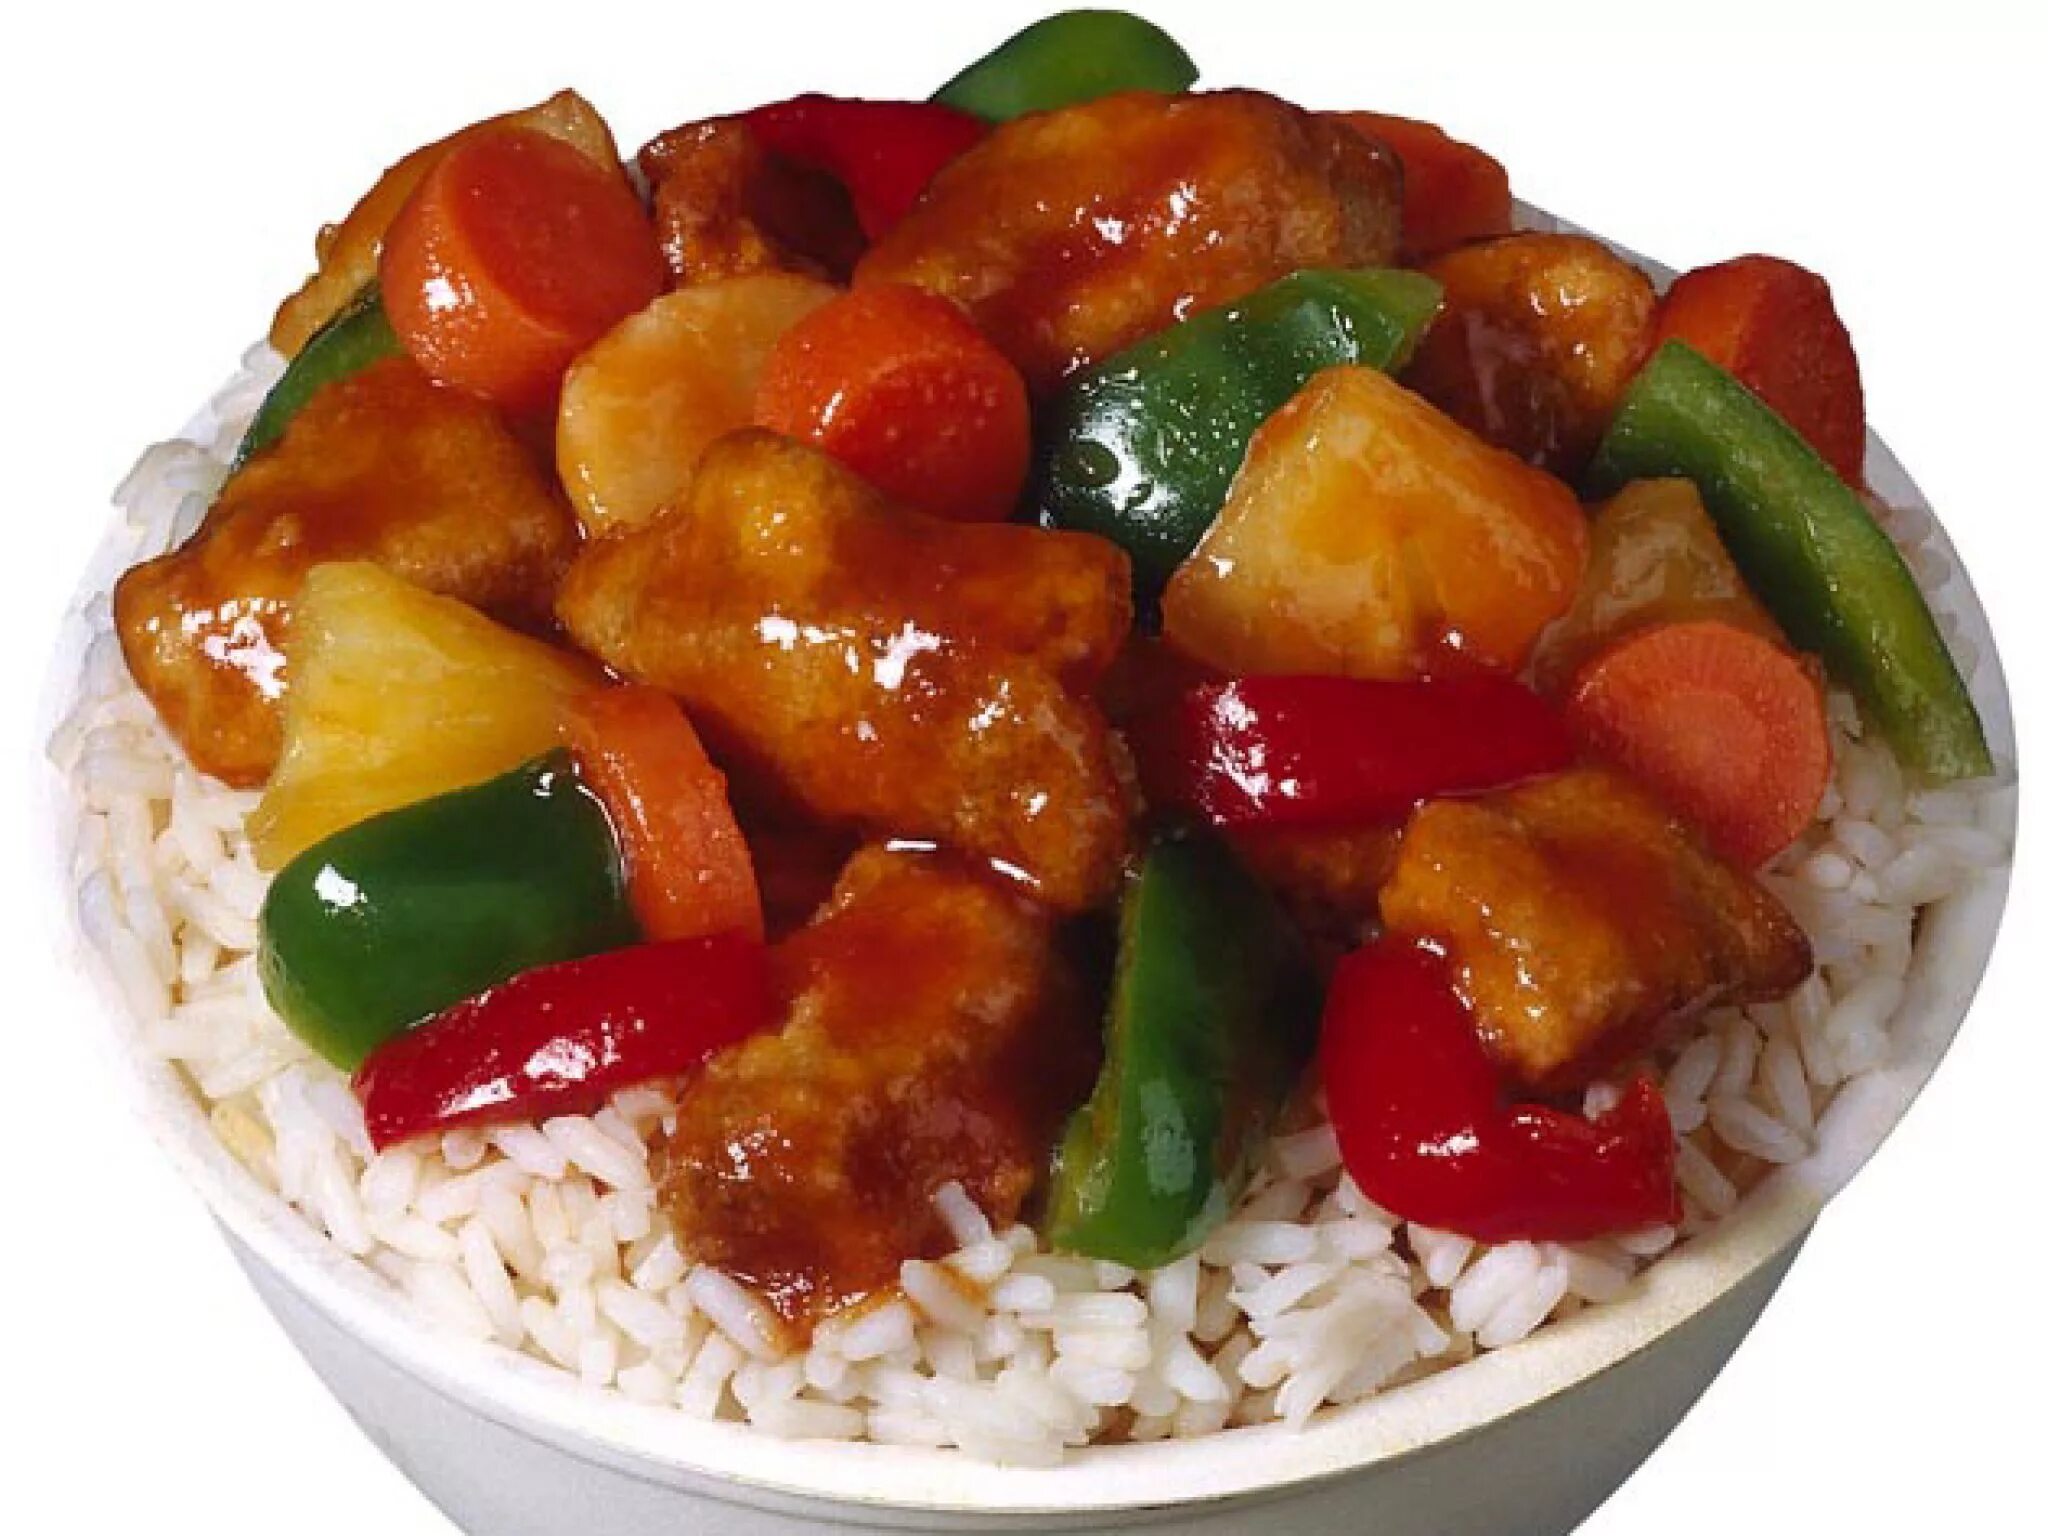 Sweet and sour. Sweet and Sour Chicken. Чикен в кисло сладком соусе. Курица в кисло-сладком соусе с овощами. Курица в кисло-сладком соусе с рисом.